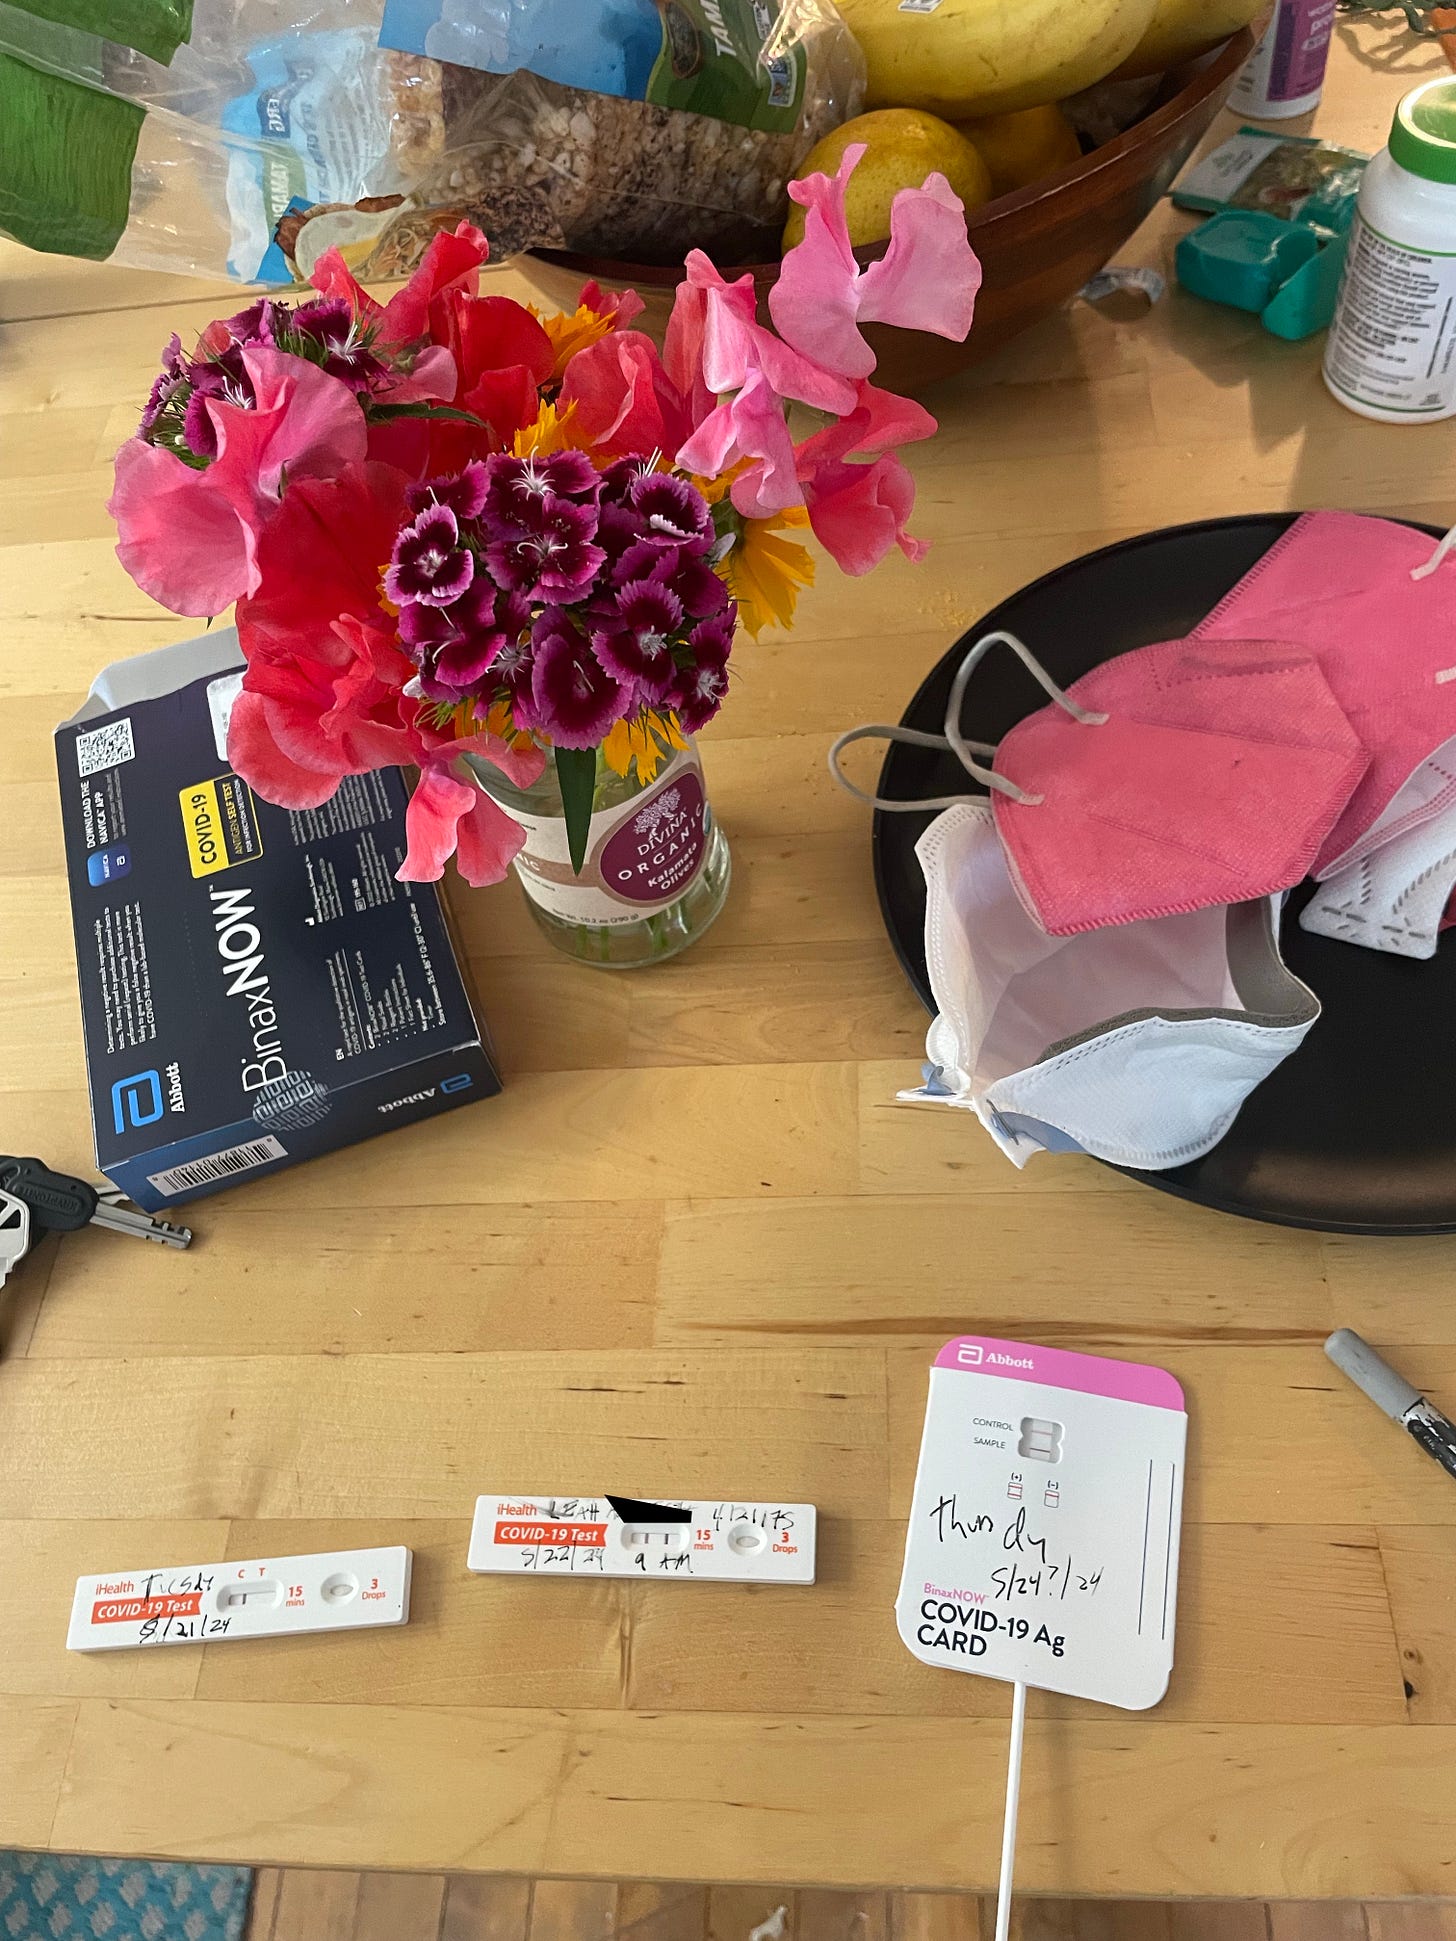 a wooden kitchen table holds a bouquet of wildflores in pinks, purples and yellow, next to bottles of supplements, a bowl holding pink KN-94 masks and a opened Binax NOW COVID 19 testing box. in front, there is a positive covid test with two lines and the date marked on it in black pen.